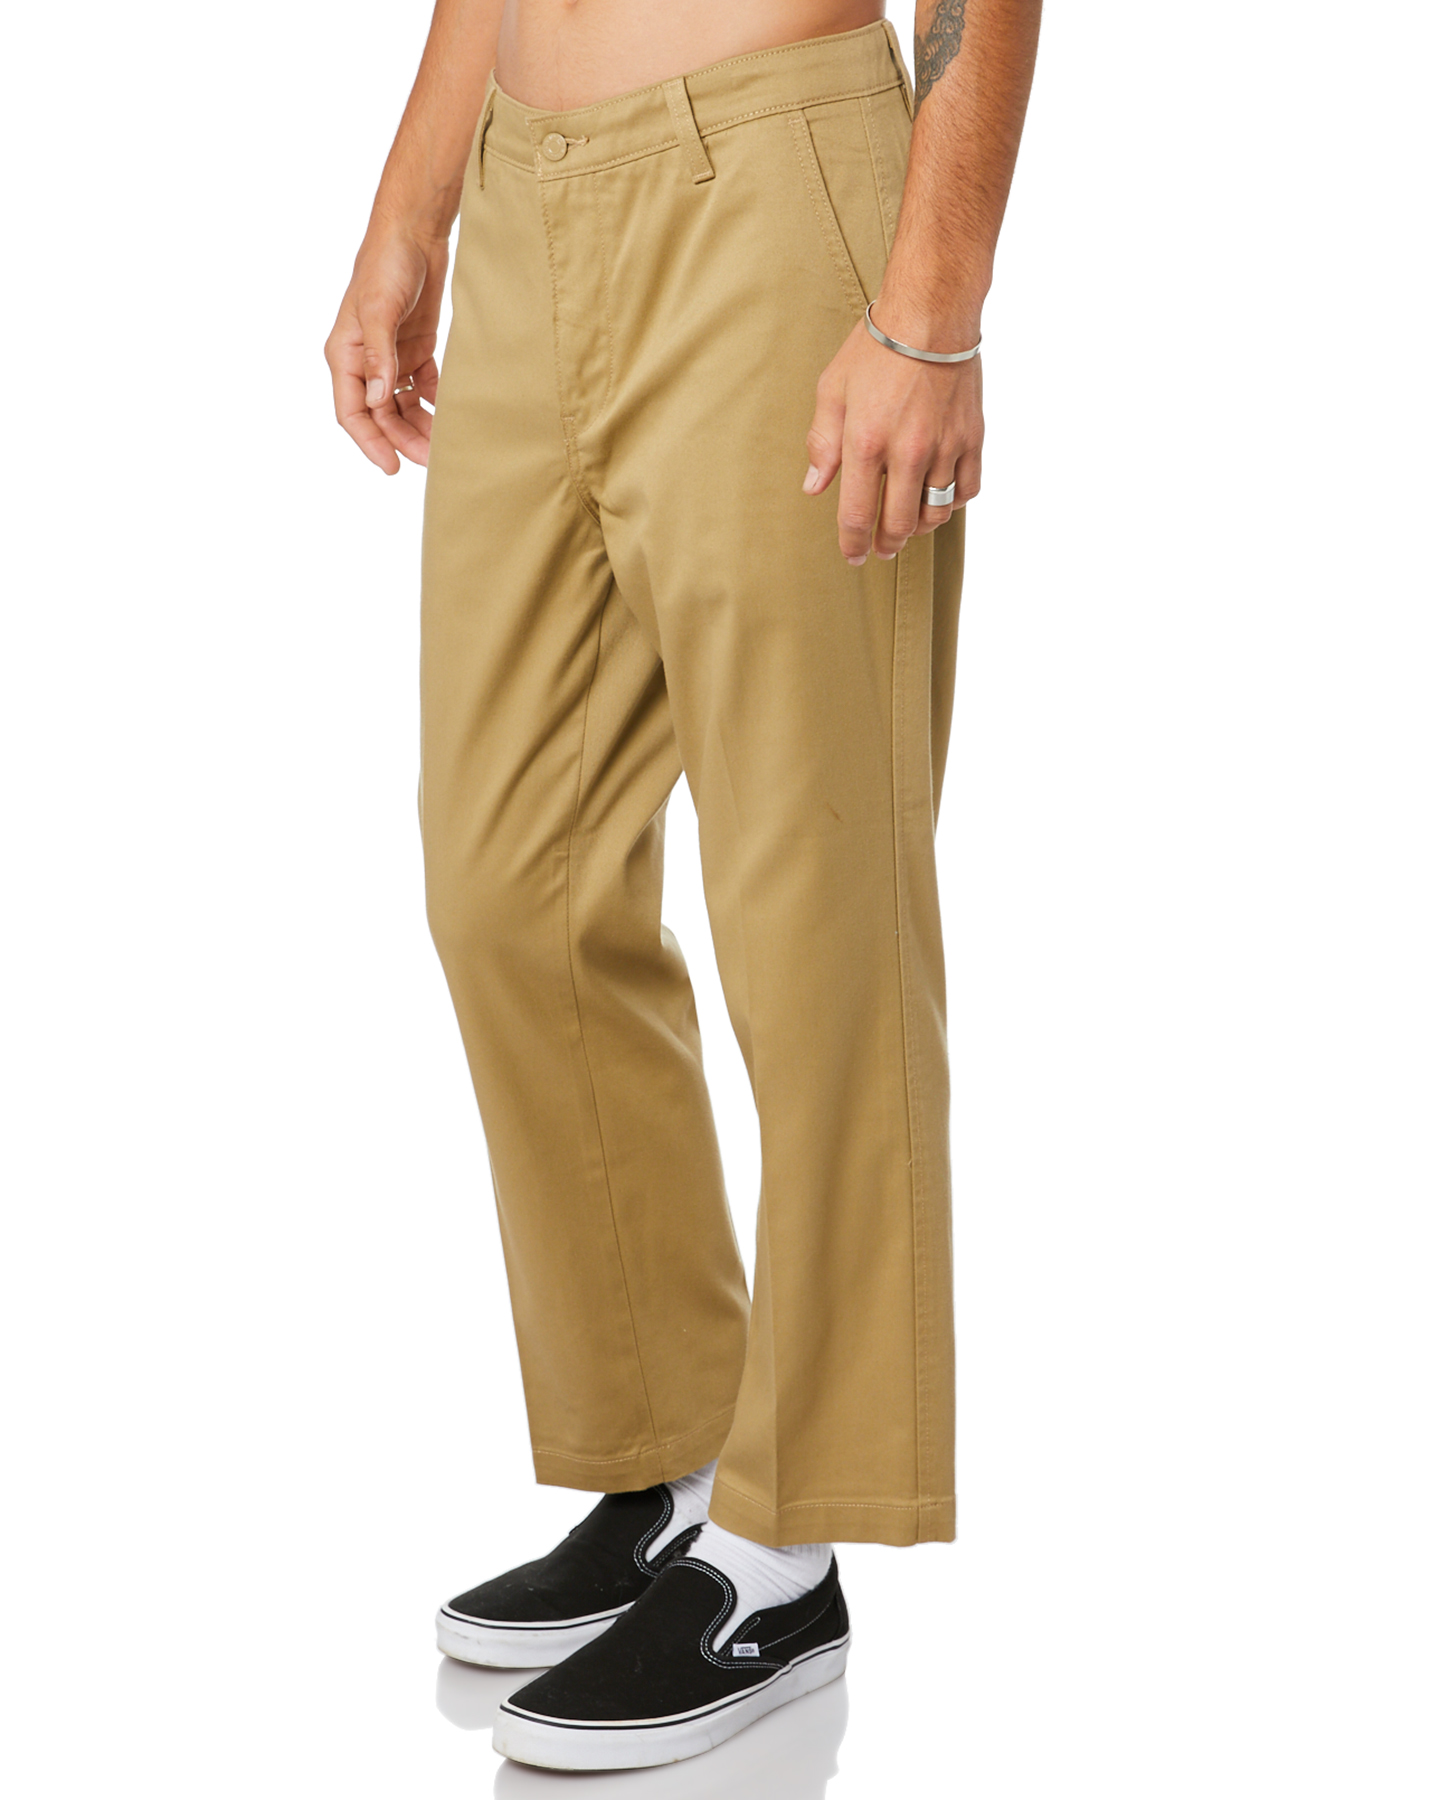 Levi's Straight Crop Ii Mens Chino Pant - Harvest Gold | SurfStitch